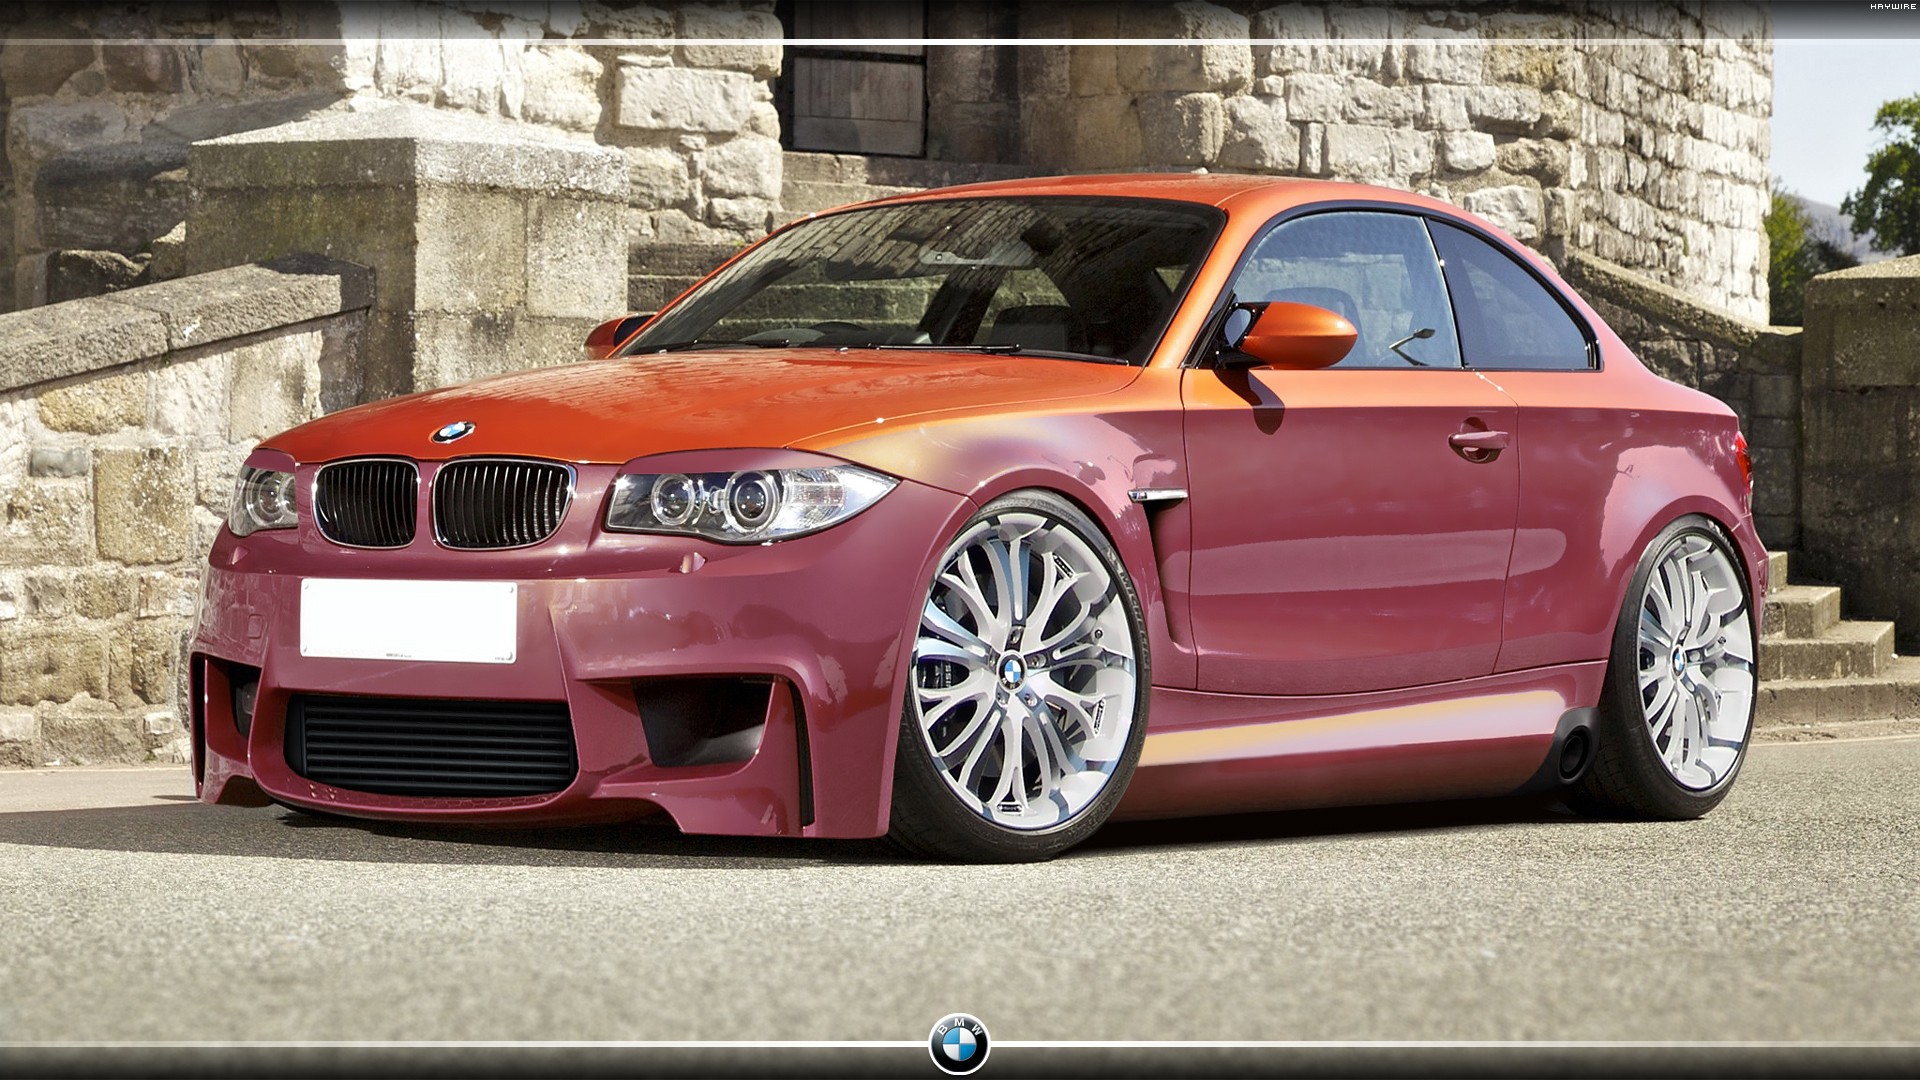 Cars Deviantart Digital Art Tuning Bmw 1 Series M Coupe Bmw 1 Series Wallpapers Hd Desktop And Mobile Backgrounds